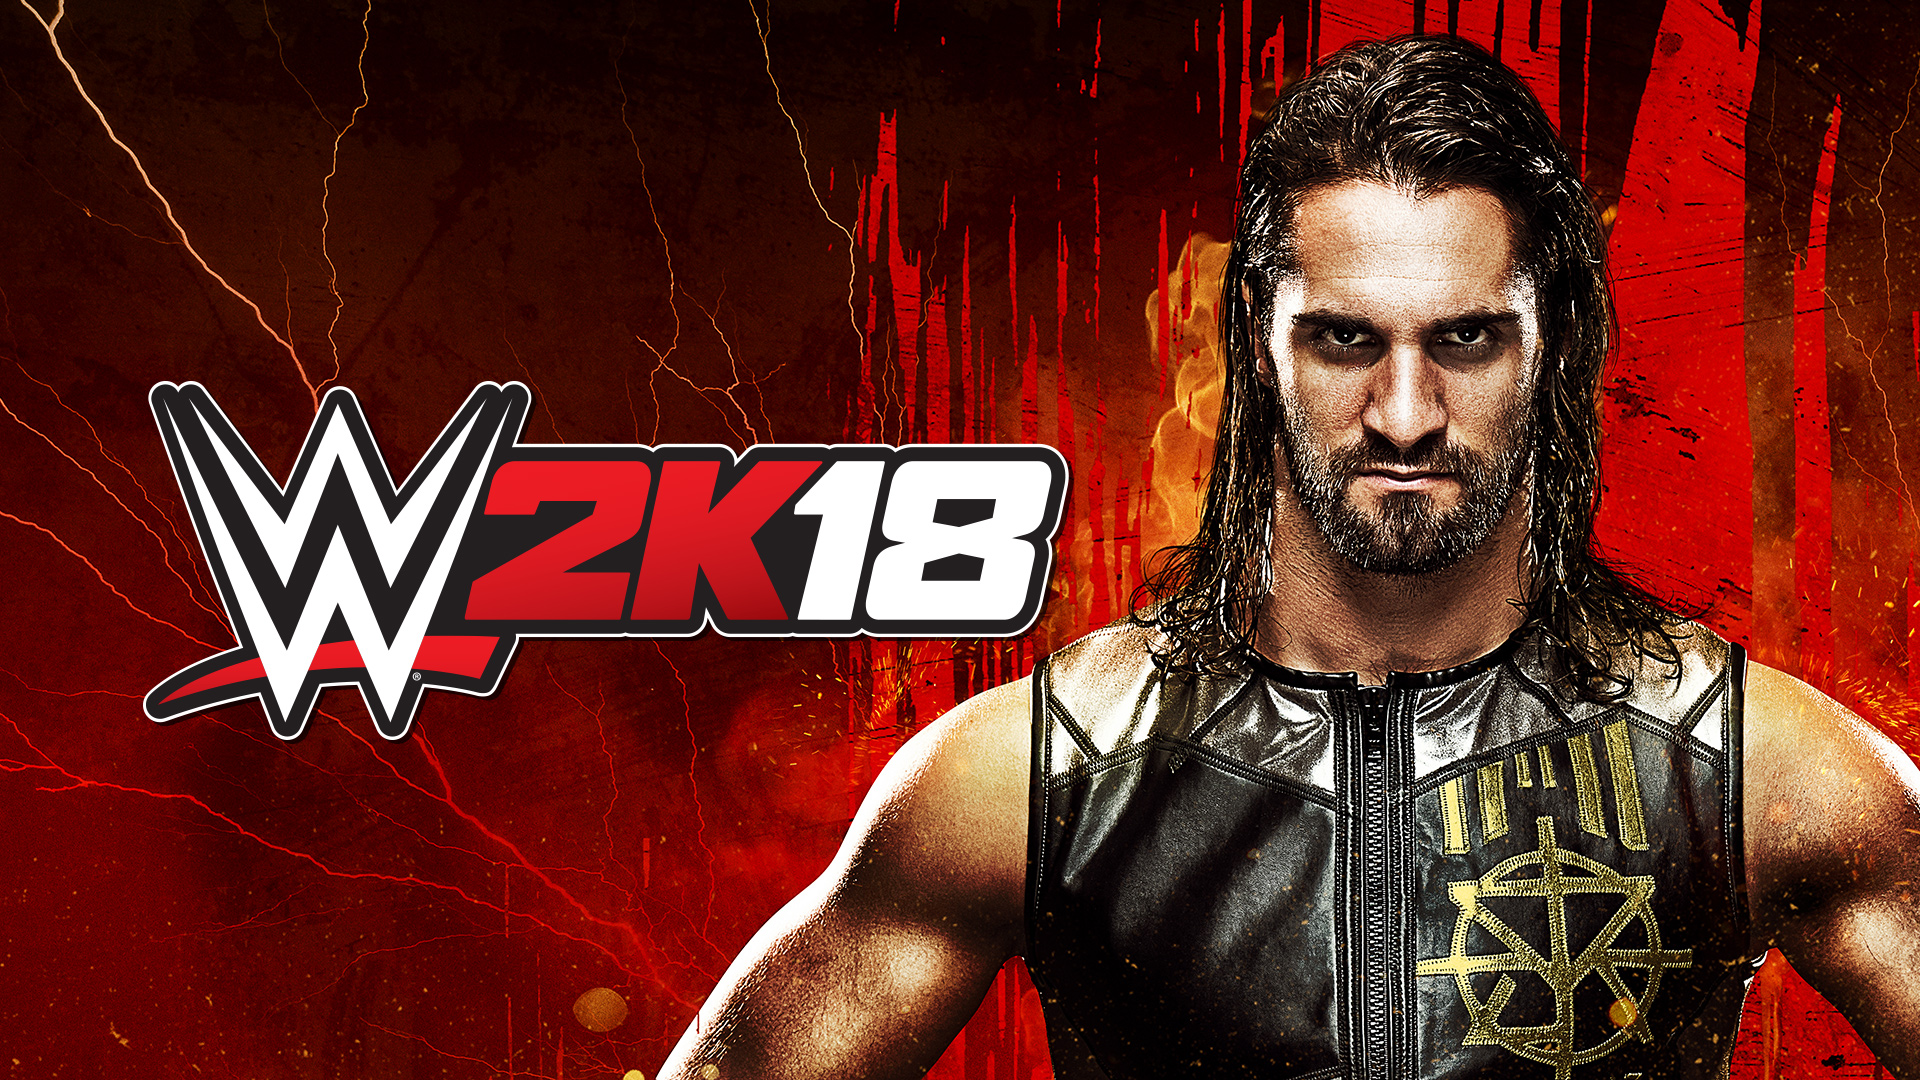 wwe wallpaper,pc game,movie,fictional character,album cover,facial hair